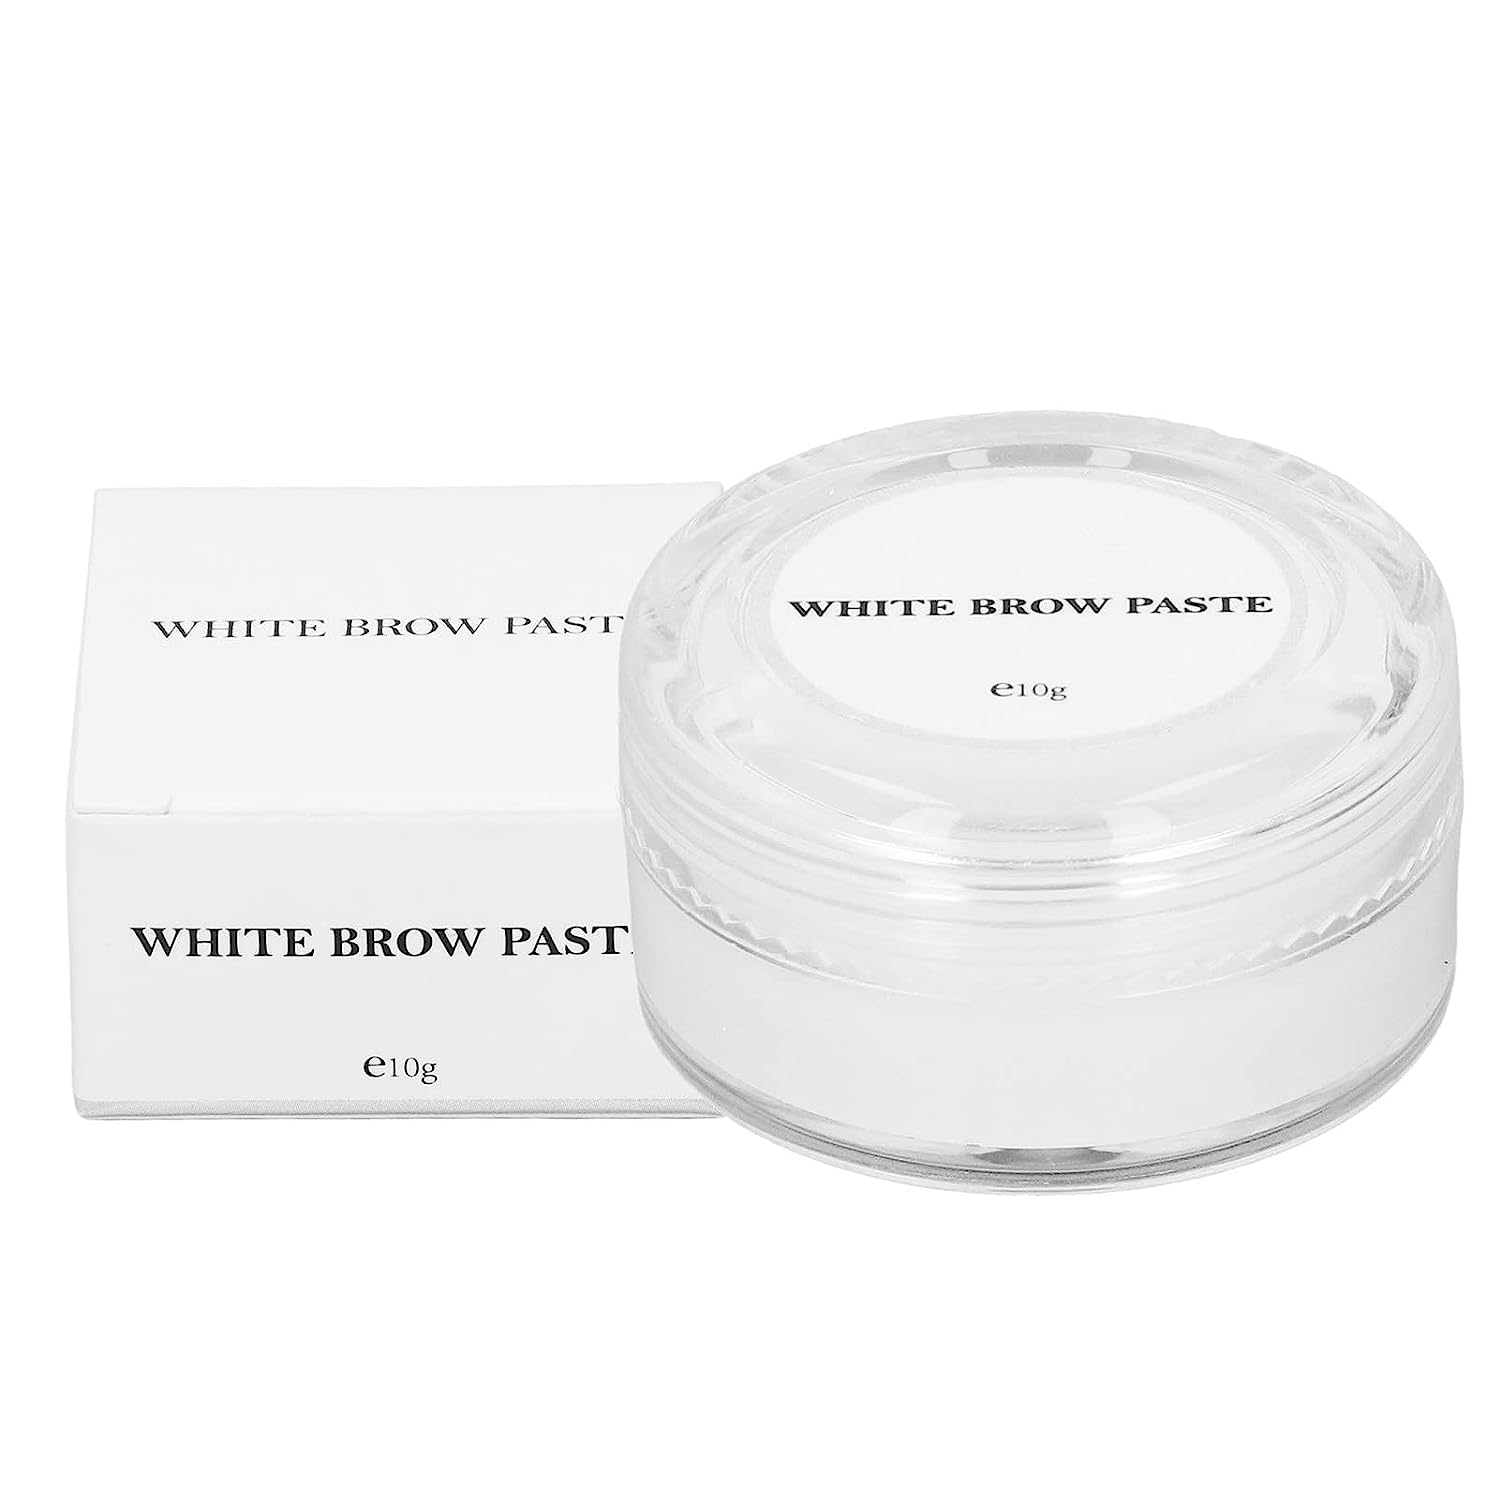 Mapping Brow Paste, Washable Eyebrow Mapping Paste for Permanent MakeUp Eyebrows, White, 10 G